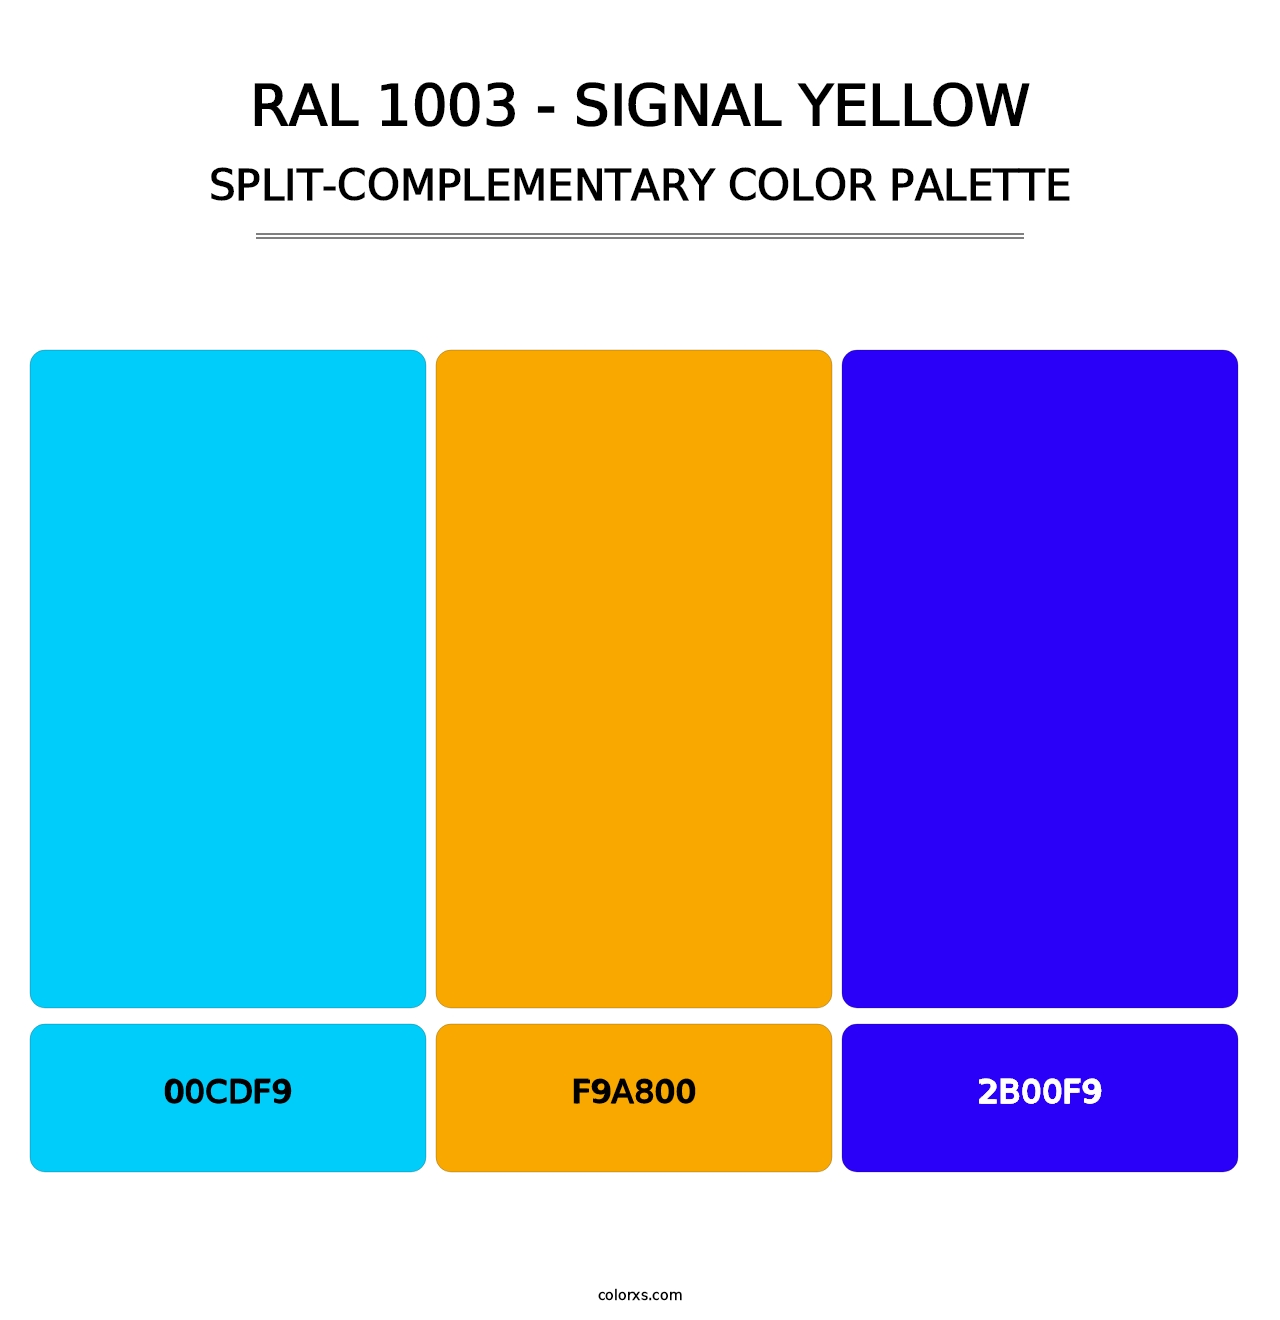 RAL 1003 - Signal Yellow - Split-Complementary Color Palette